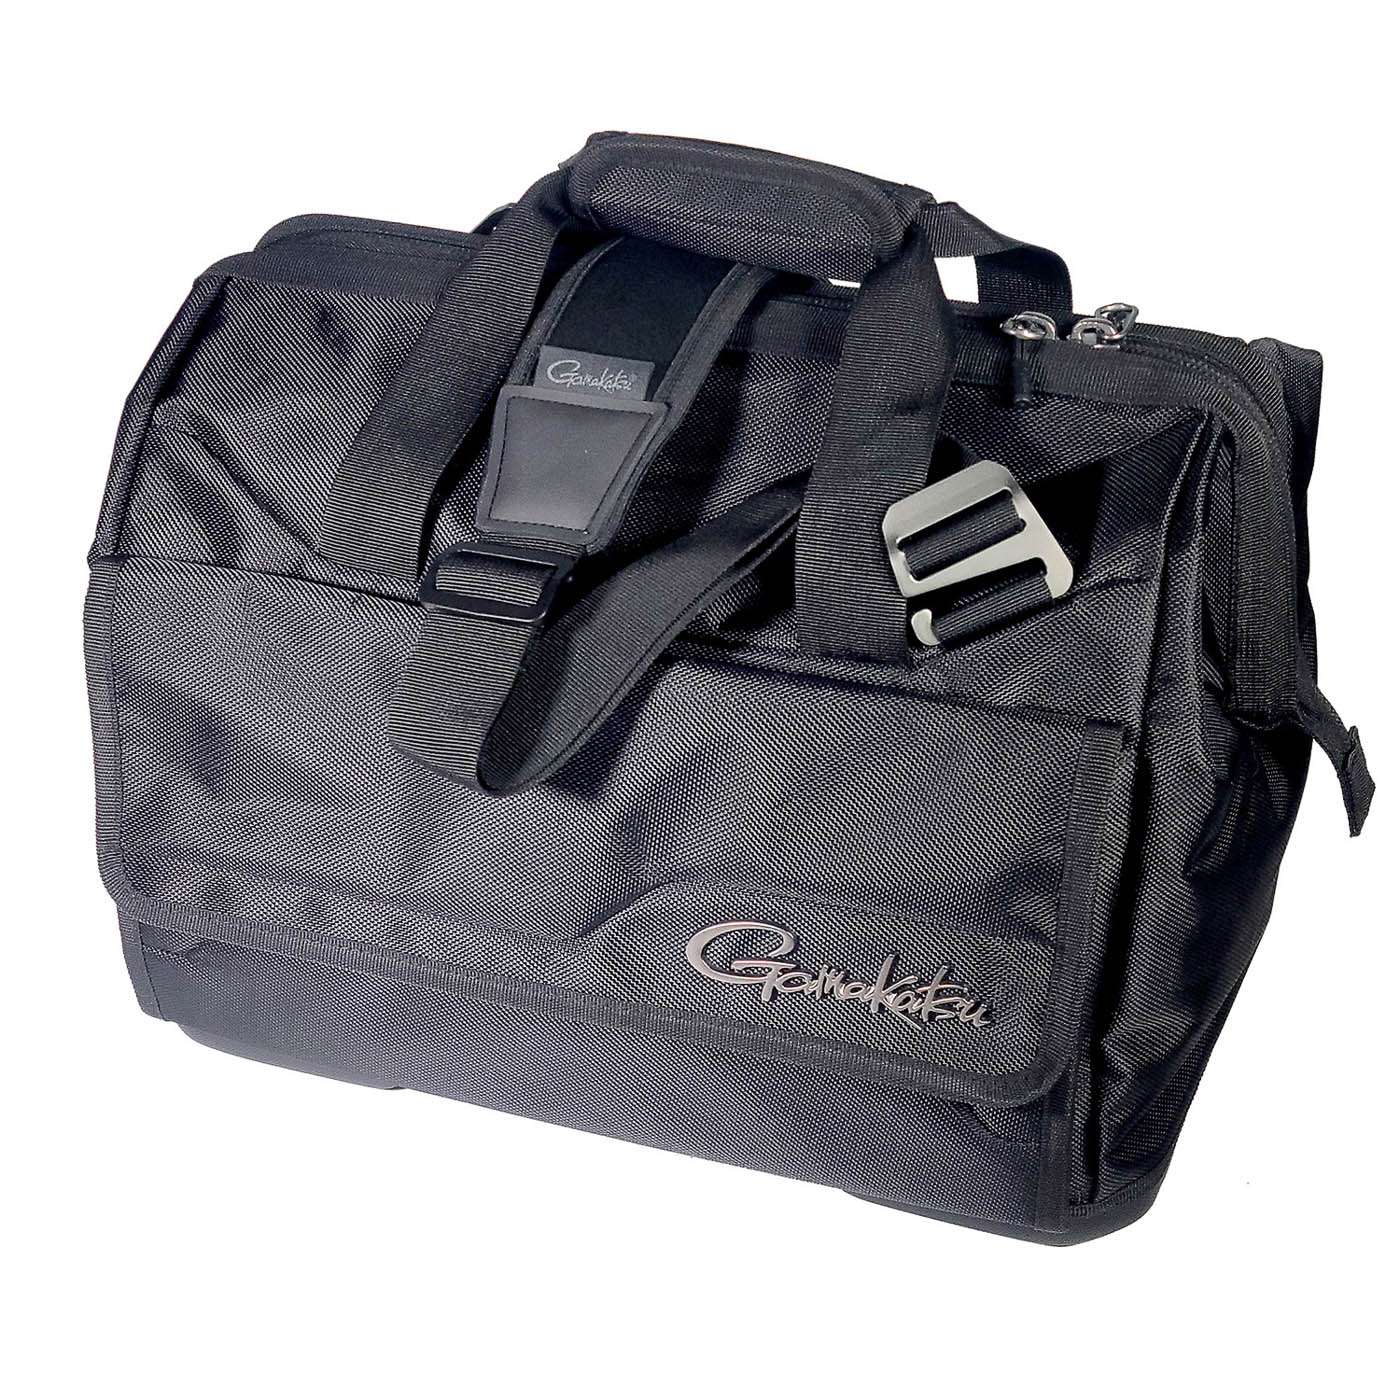 <p><strong>Gamakatsu G-Bag EWM 5000H</strong></p><p>The G-Bag EWM 5000 H Tackle Bag features an Extra Wide Mouth (EWM) opening for easy access. An internal wire frame keeps the main compartment in the open position allowing anglers to sort through tackle and find that perfect bait with ease. Anglers can fit up to five Gamakatsu G-Box 3700 or eight 3600 utility cases inside. A quick-access magnetic front pocket flap also stays in an open position, letting anglers effortlessly grab often needed items from the handy pocket. The durable, 1680 denier polyester construction stands up to a rough life on the water, with a water- and slip-resistant EVA molded base that protects the contents against moisture. $153.88. <a href=